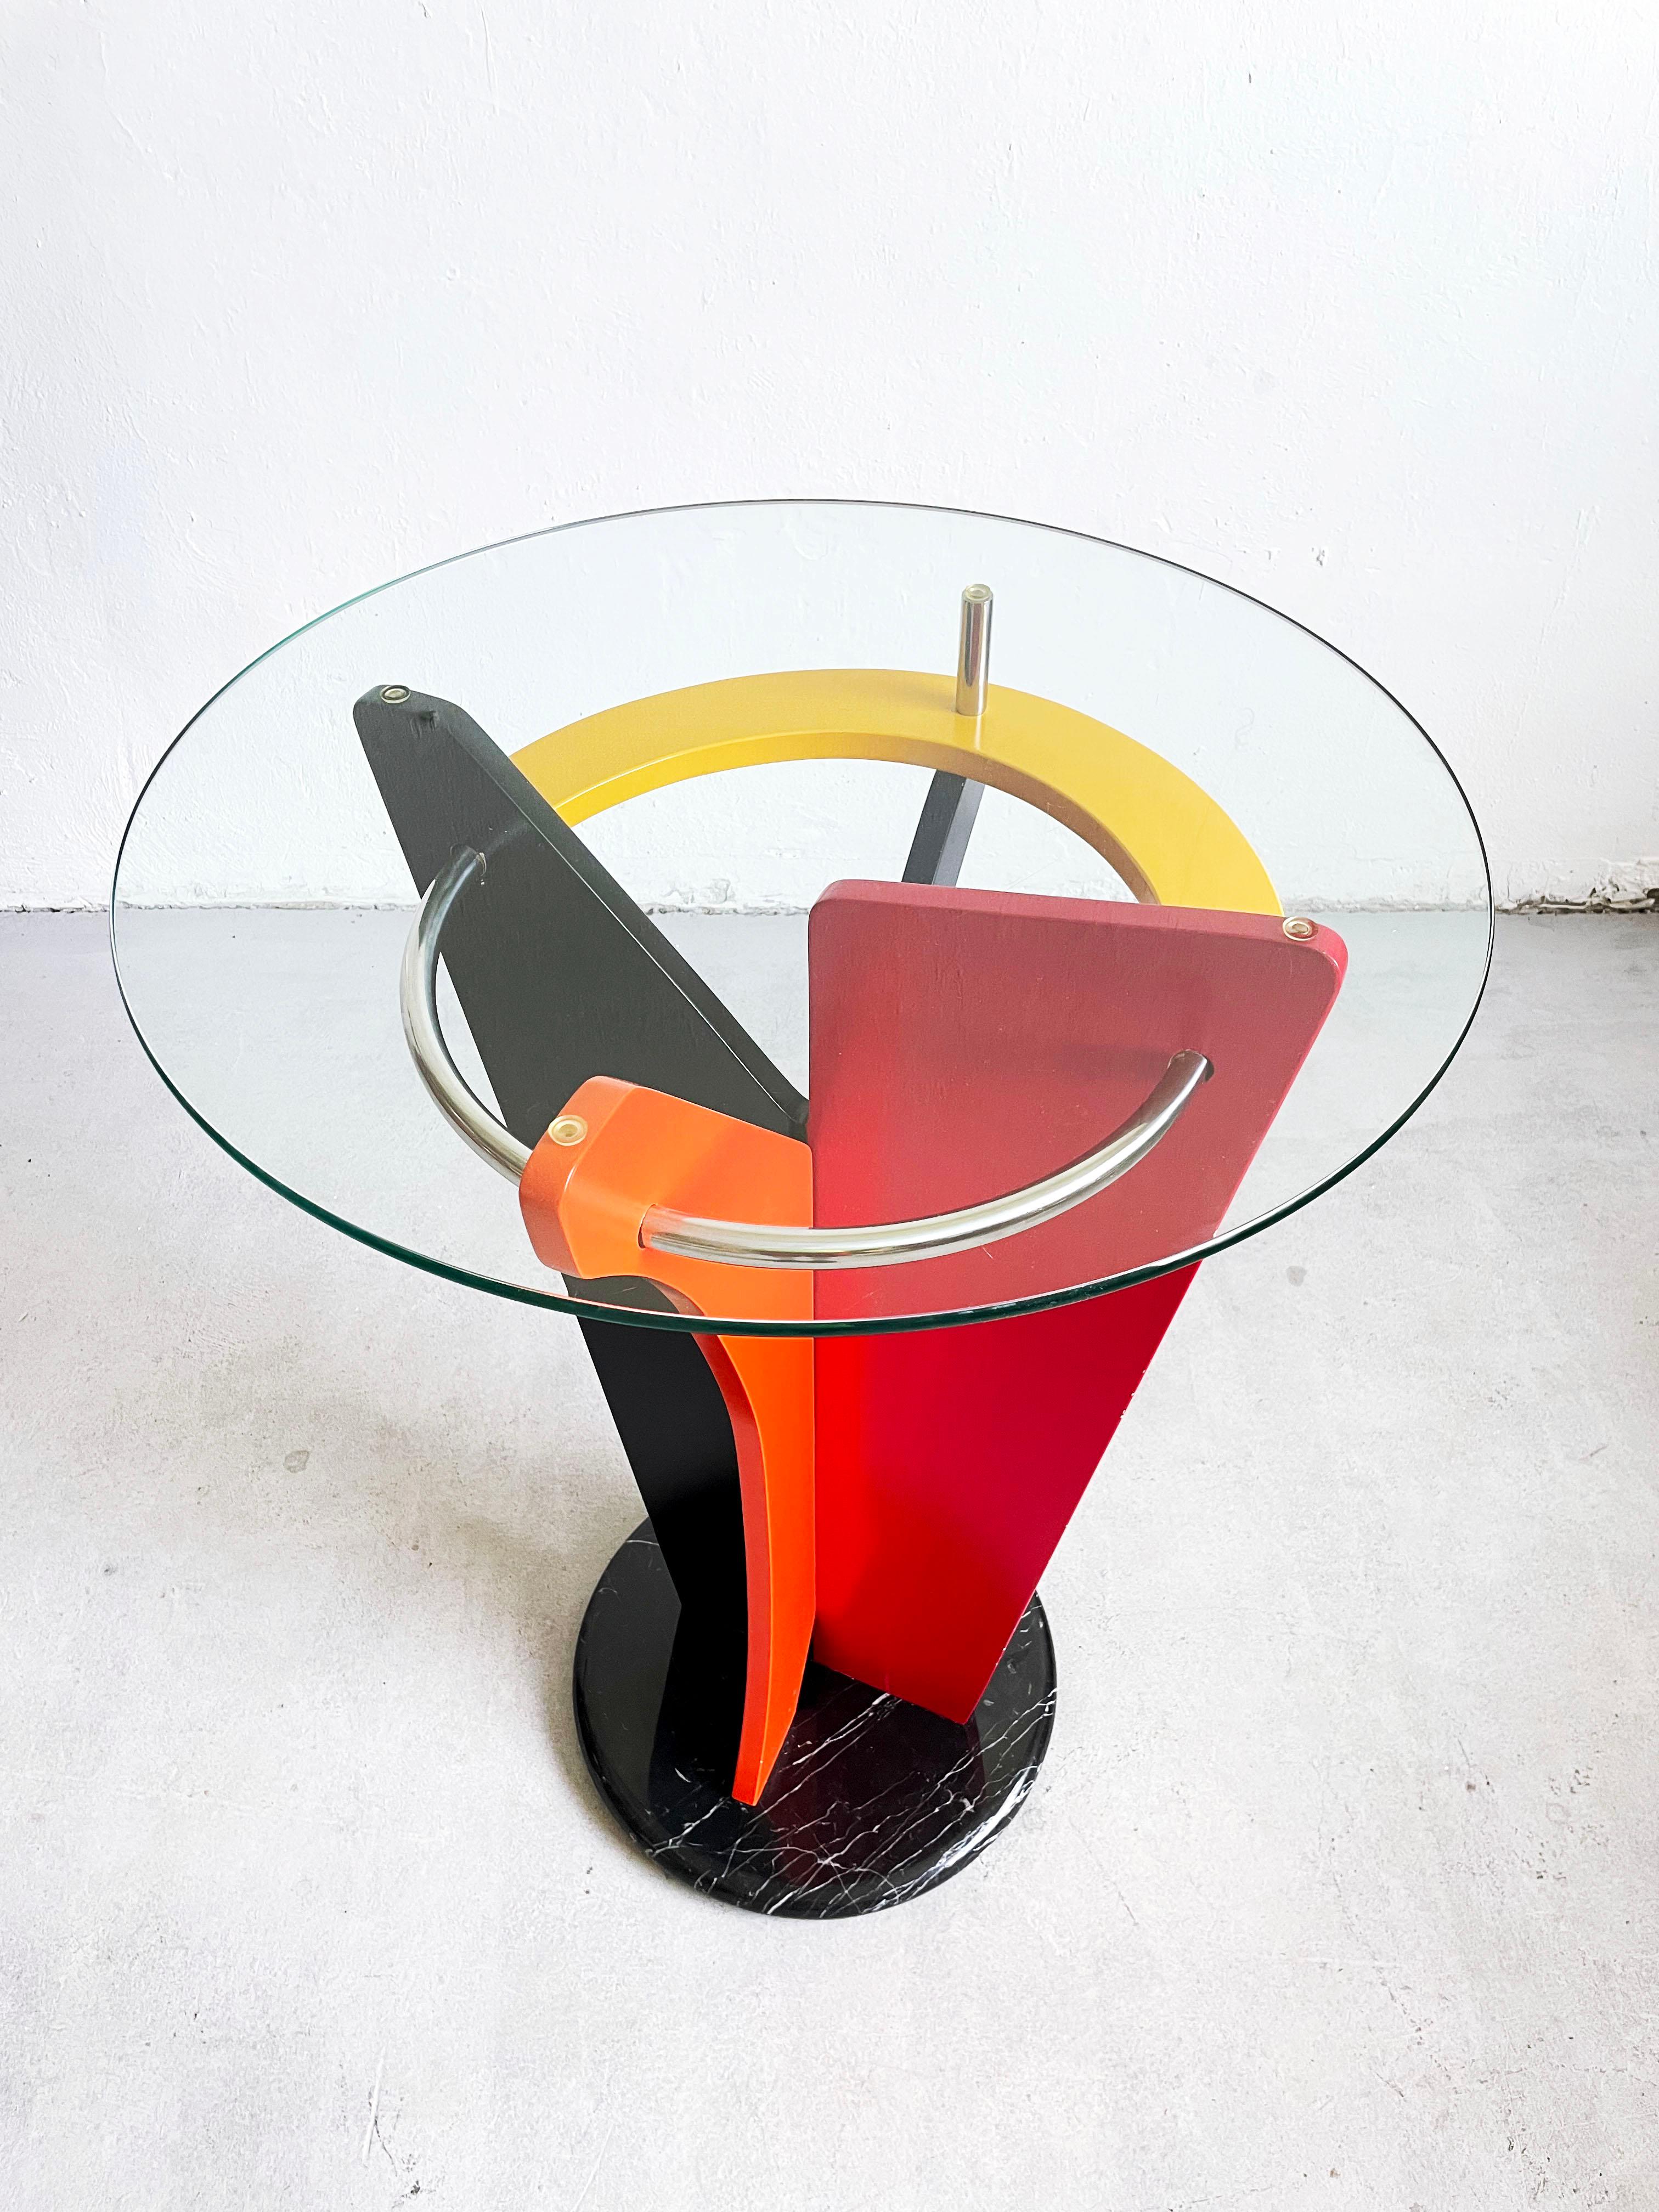 1980's Postmodern Peter Shire Style Italian Pedestal or Bar Table.

This beautiful sculptural Memphis design statement piece features abstract wooden structure in yellow, red, black, orange and blue color finish
The round base of the table is made